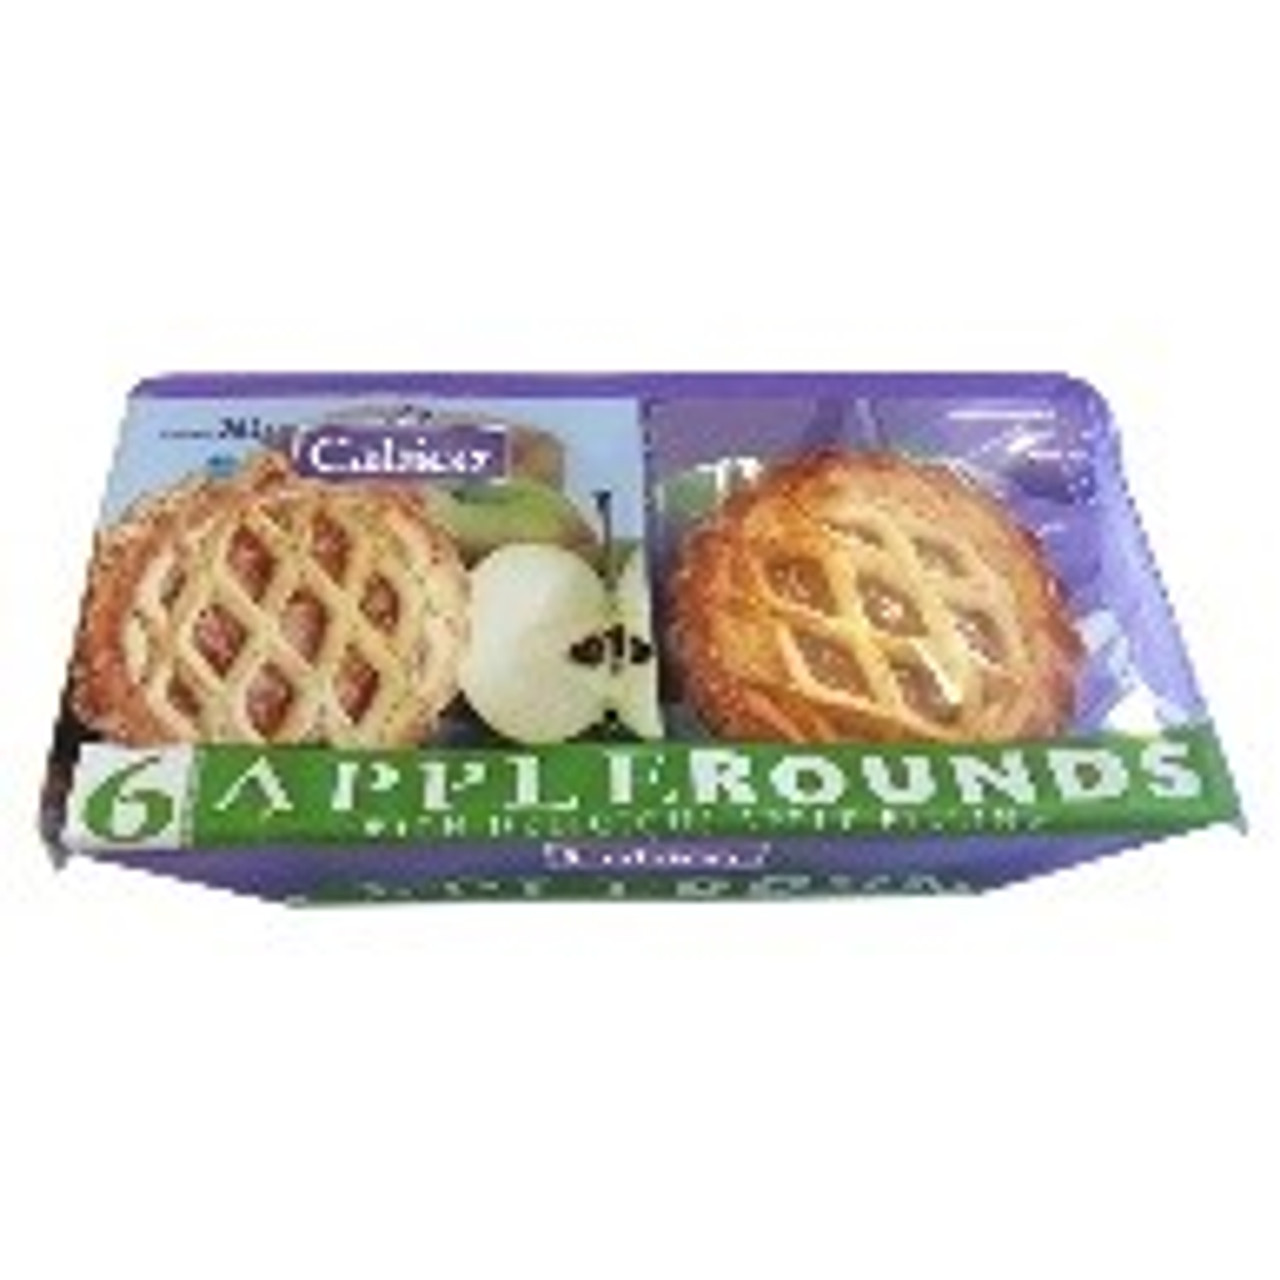 Cabico 6 Apple Rounds 264g (Oct 23) RRP £1.79 CLEARANCE XL £0.89 or 2 for £1.50